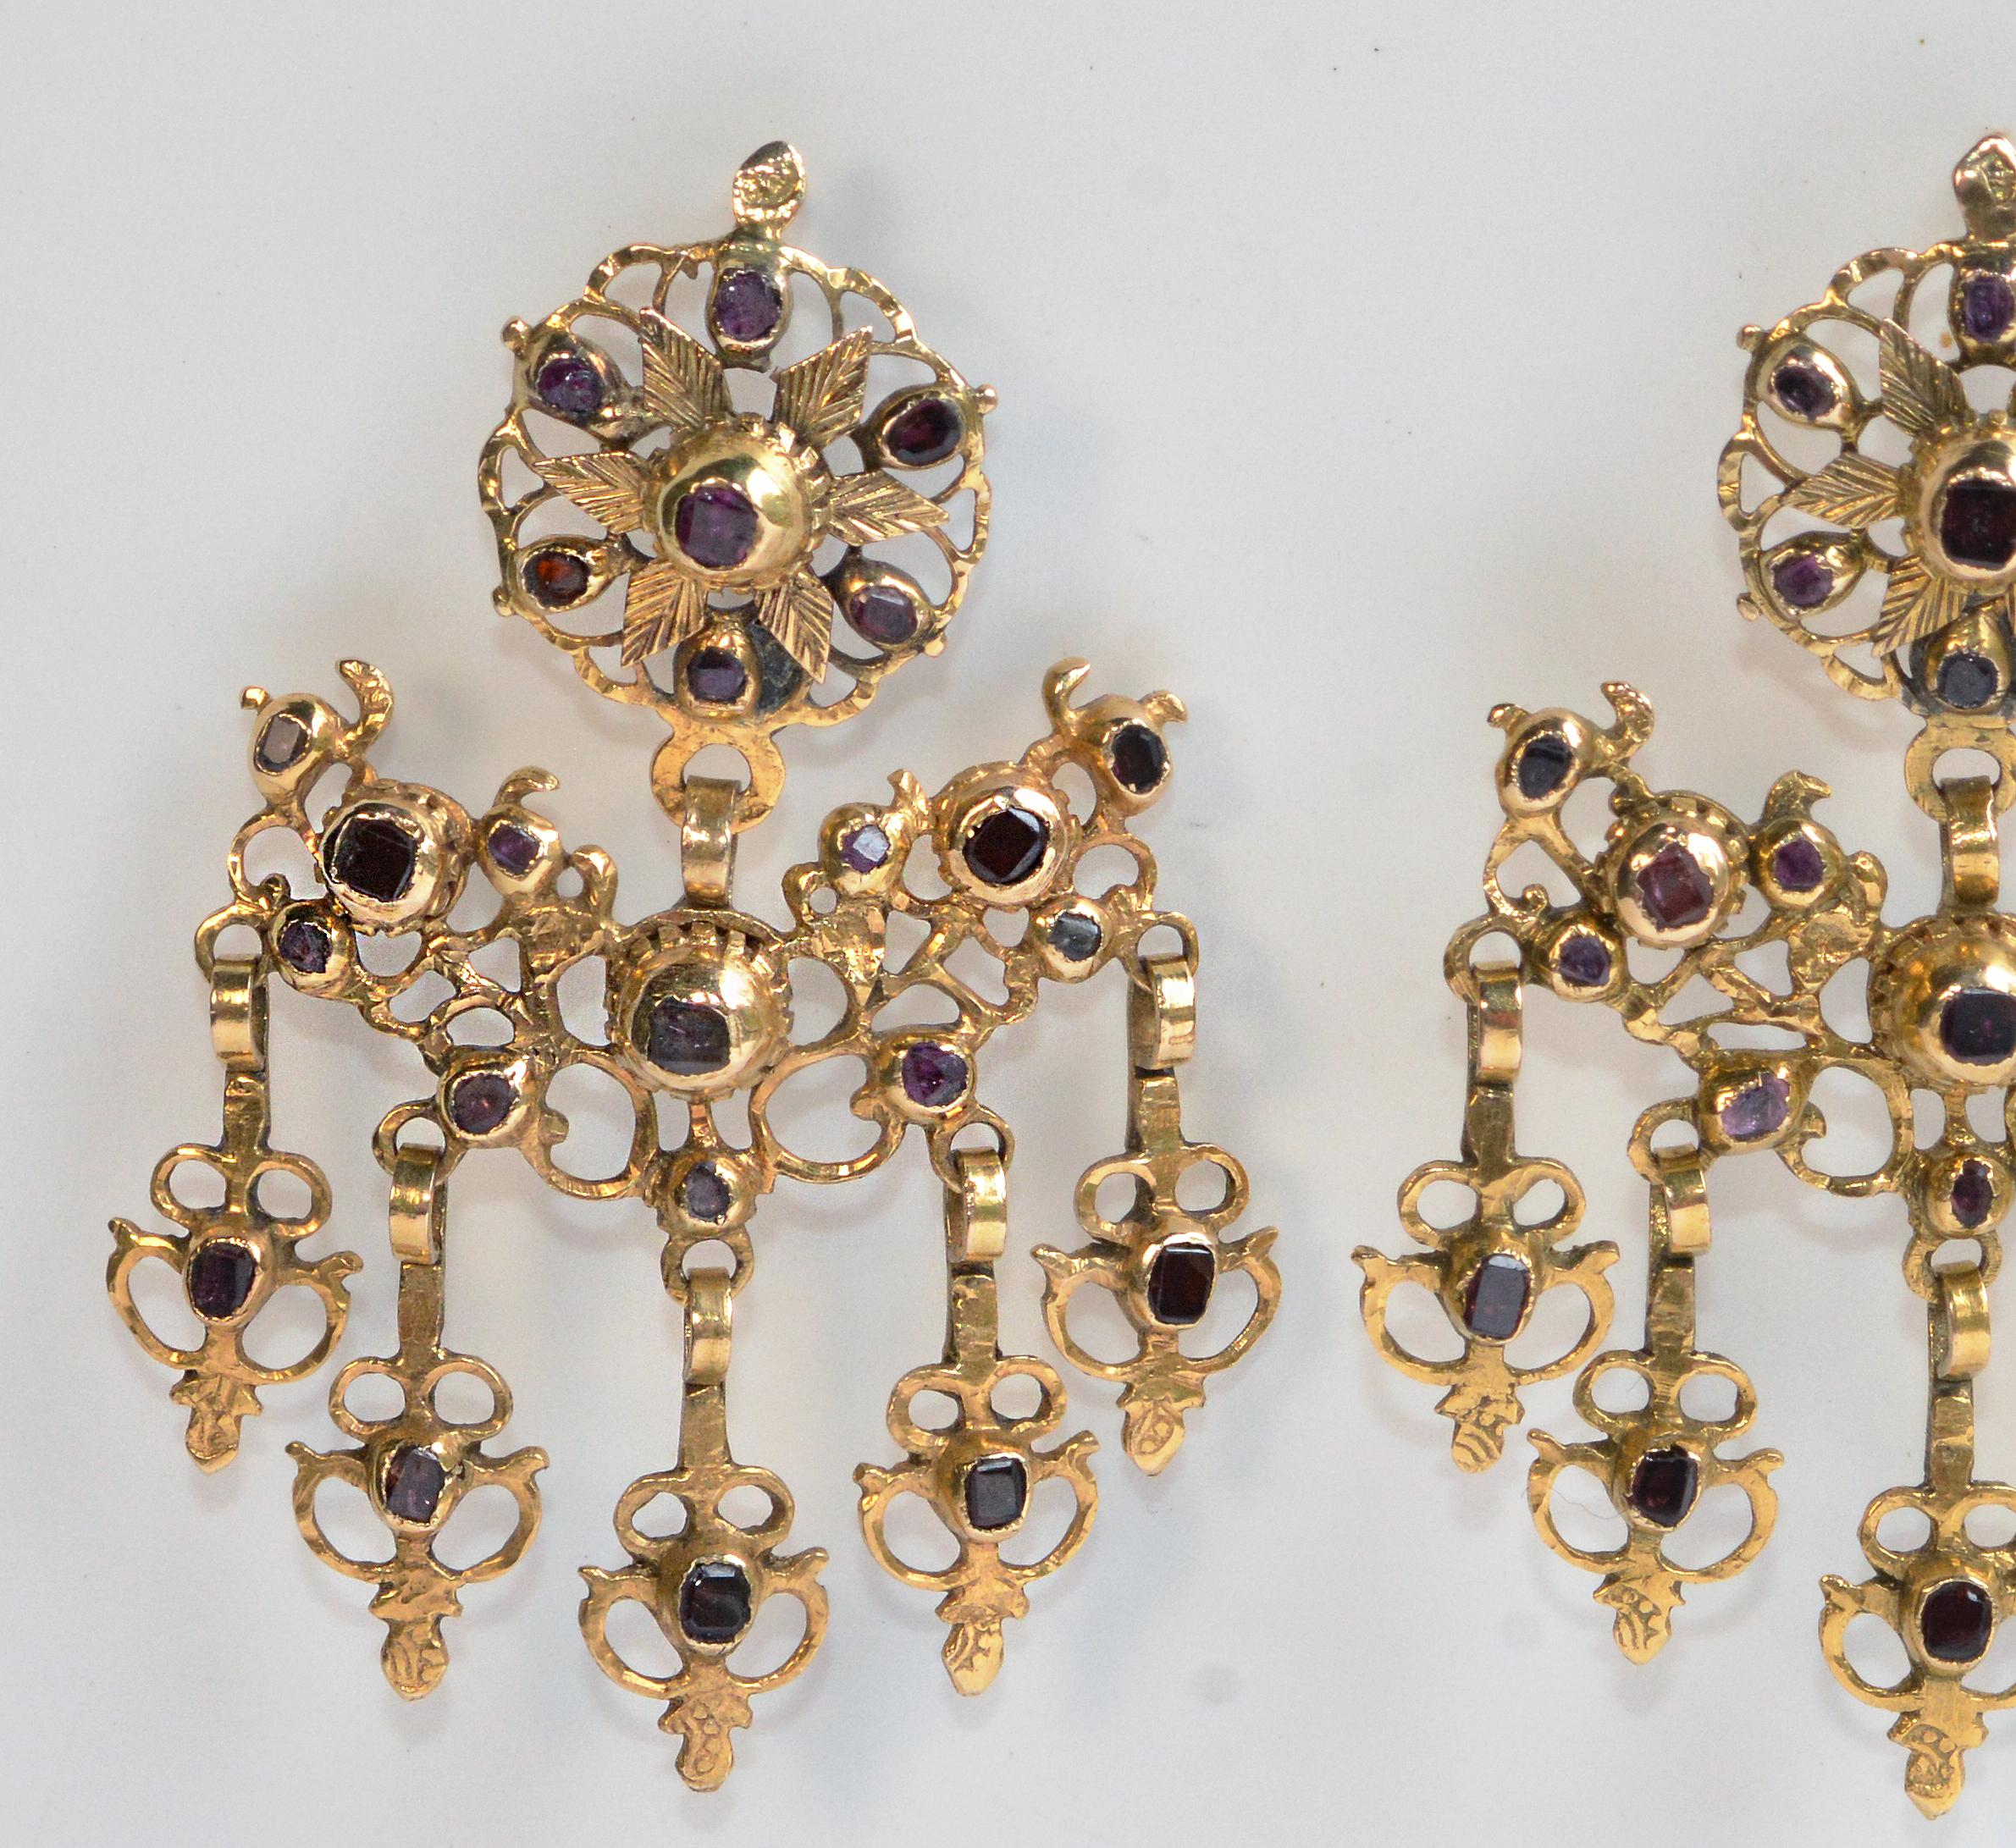 An amazing and rare pair of original gold and garnet Iberian earrings, circa 1770. These beautiful pieces of history are striking and regal. They feature a mix of foil backed red and pink, flat and table cut garnets in closed back settings. The